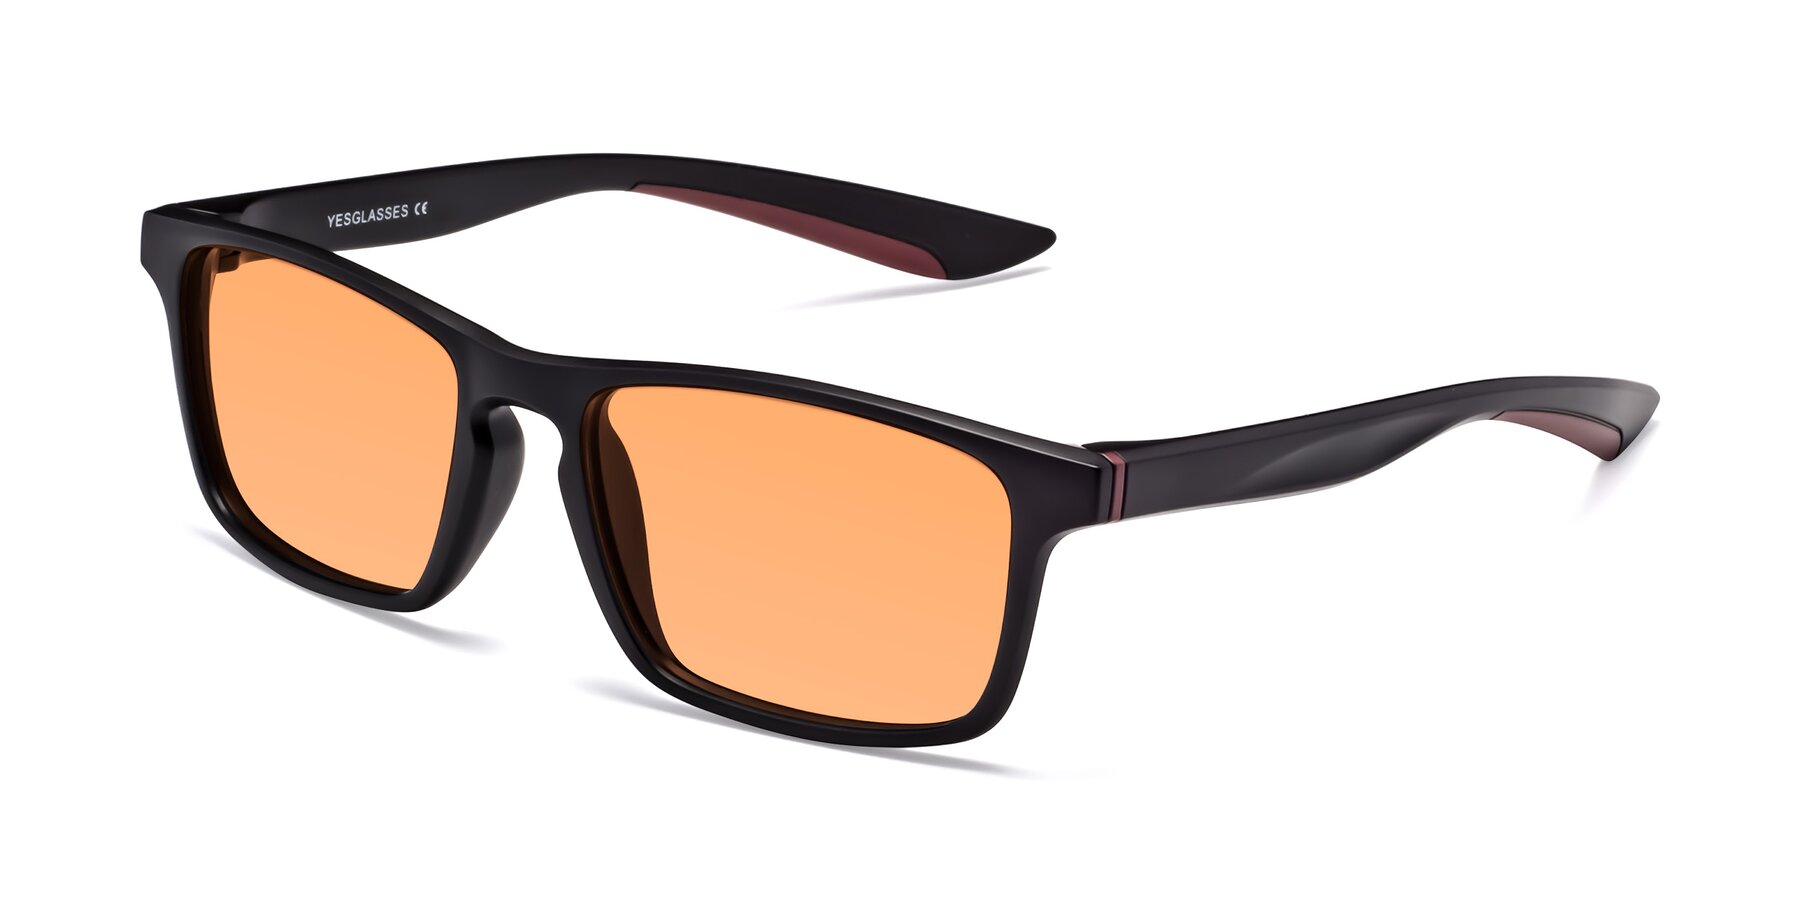 Angle of Passion in Matte Black-Wine with Medium Orange Tinted Lenses